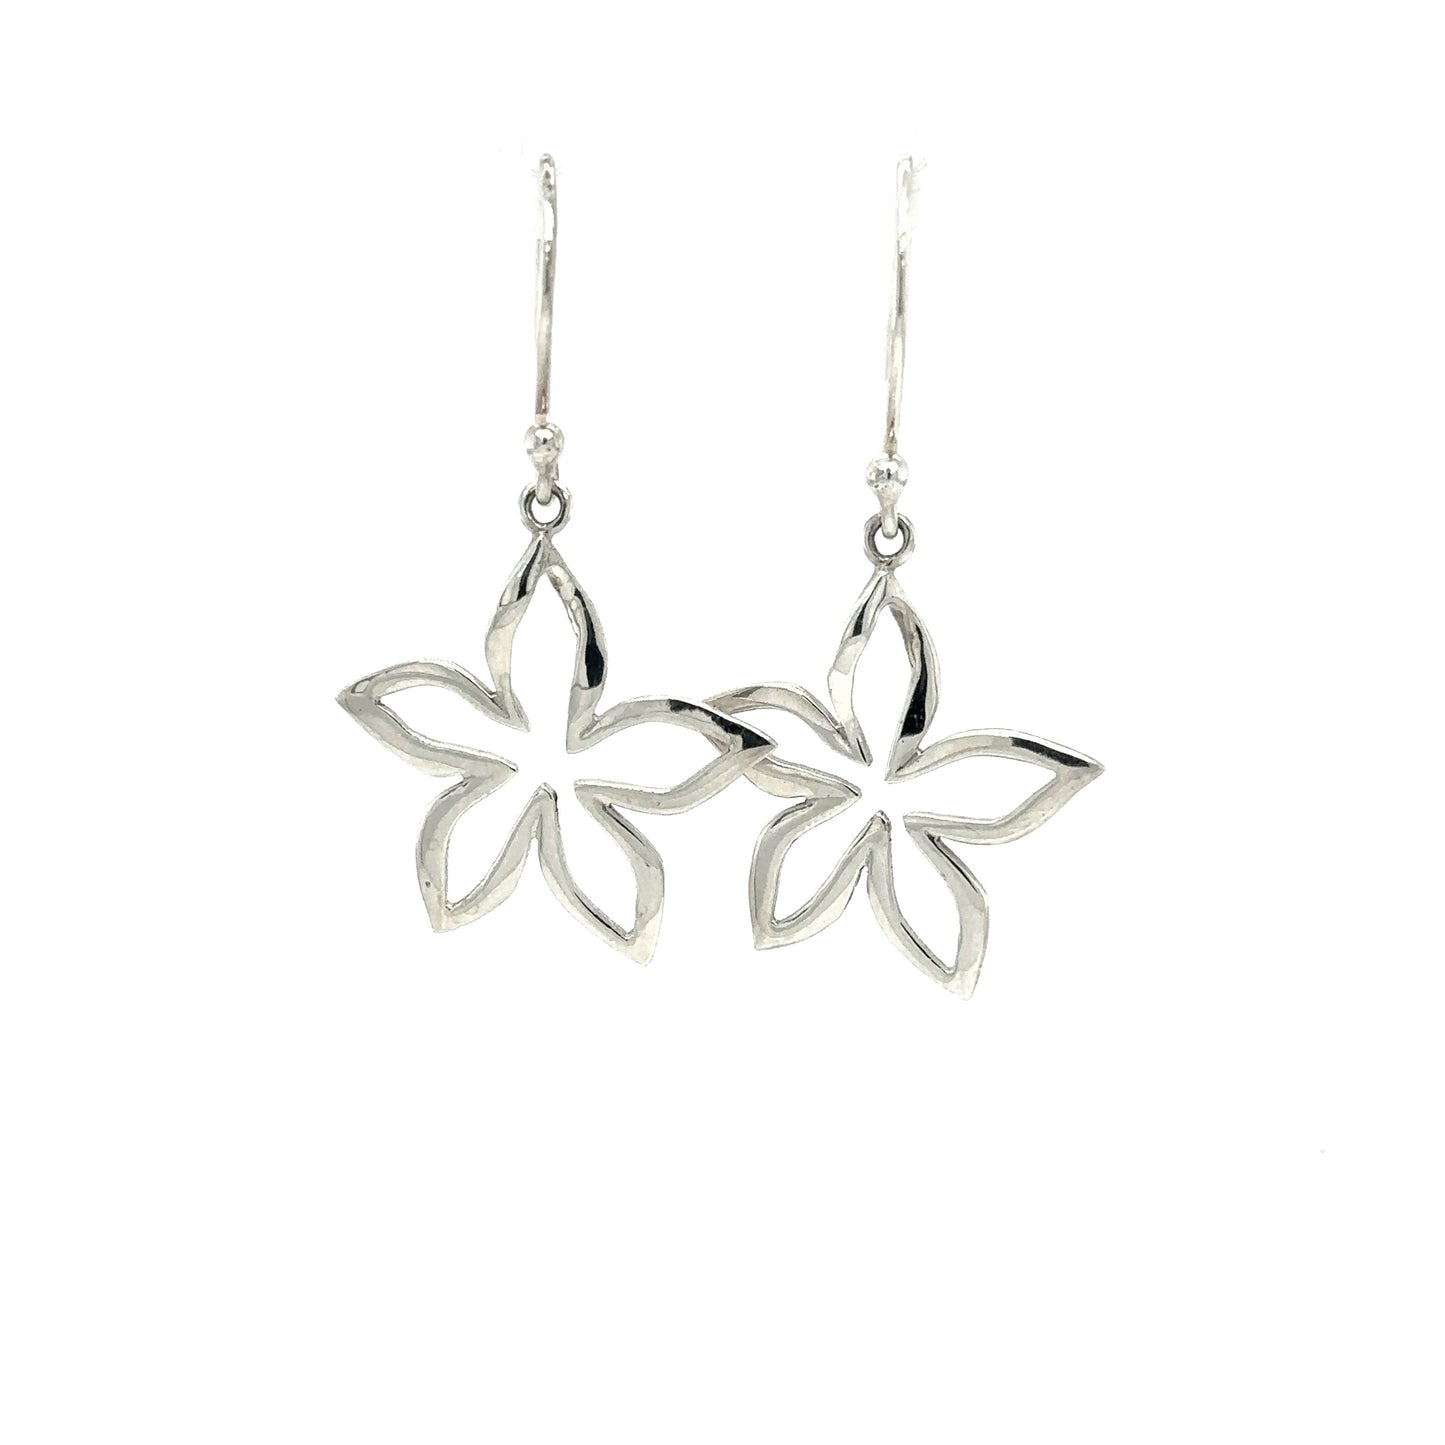 A pair of Simple Open Flower Earrings in Super Silver, on a white background, made with .925 Silver.